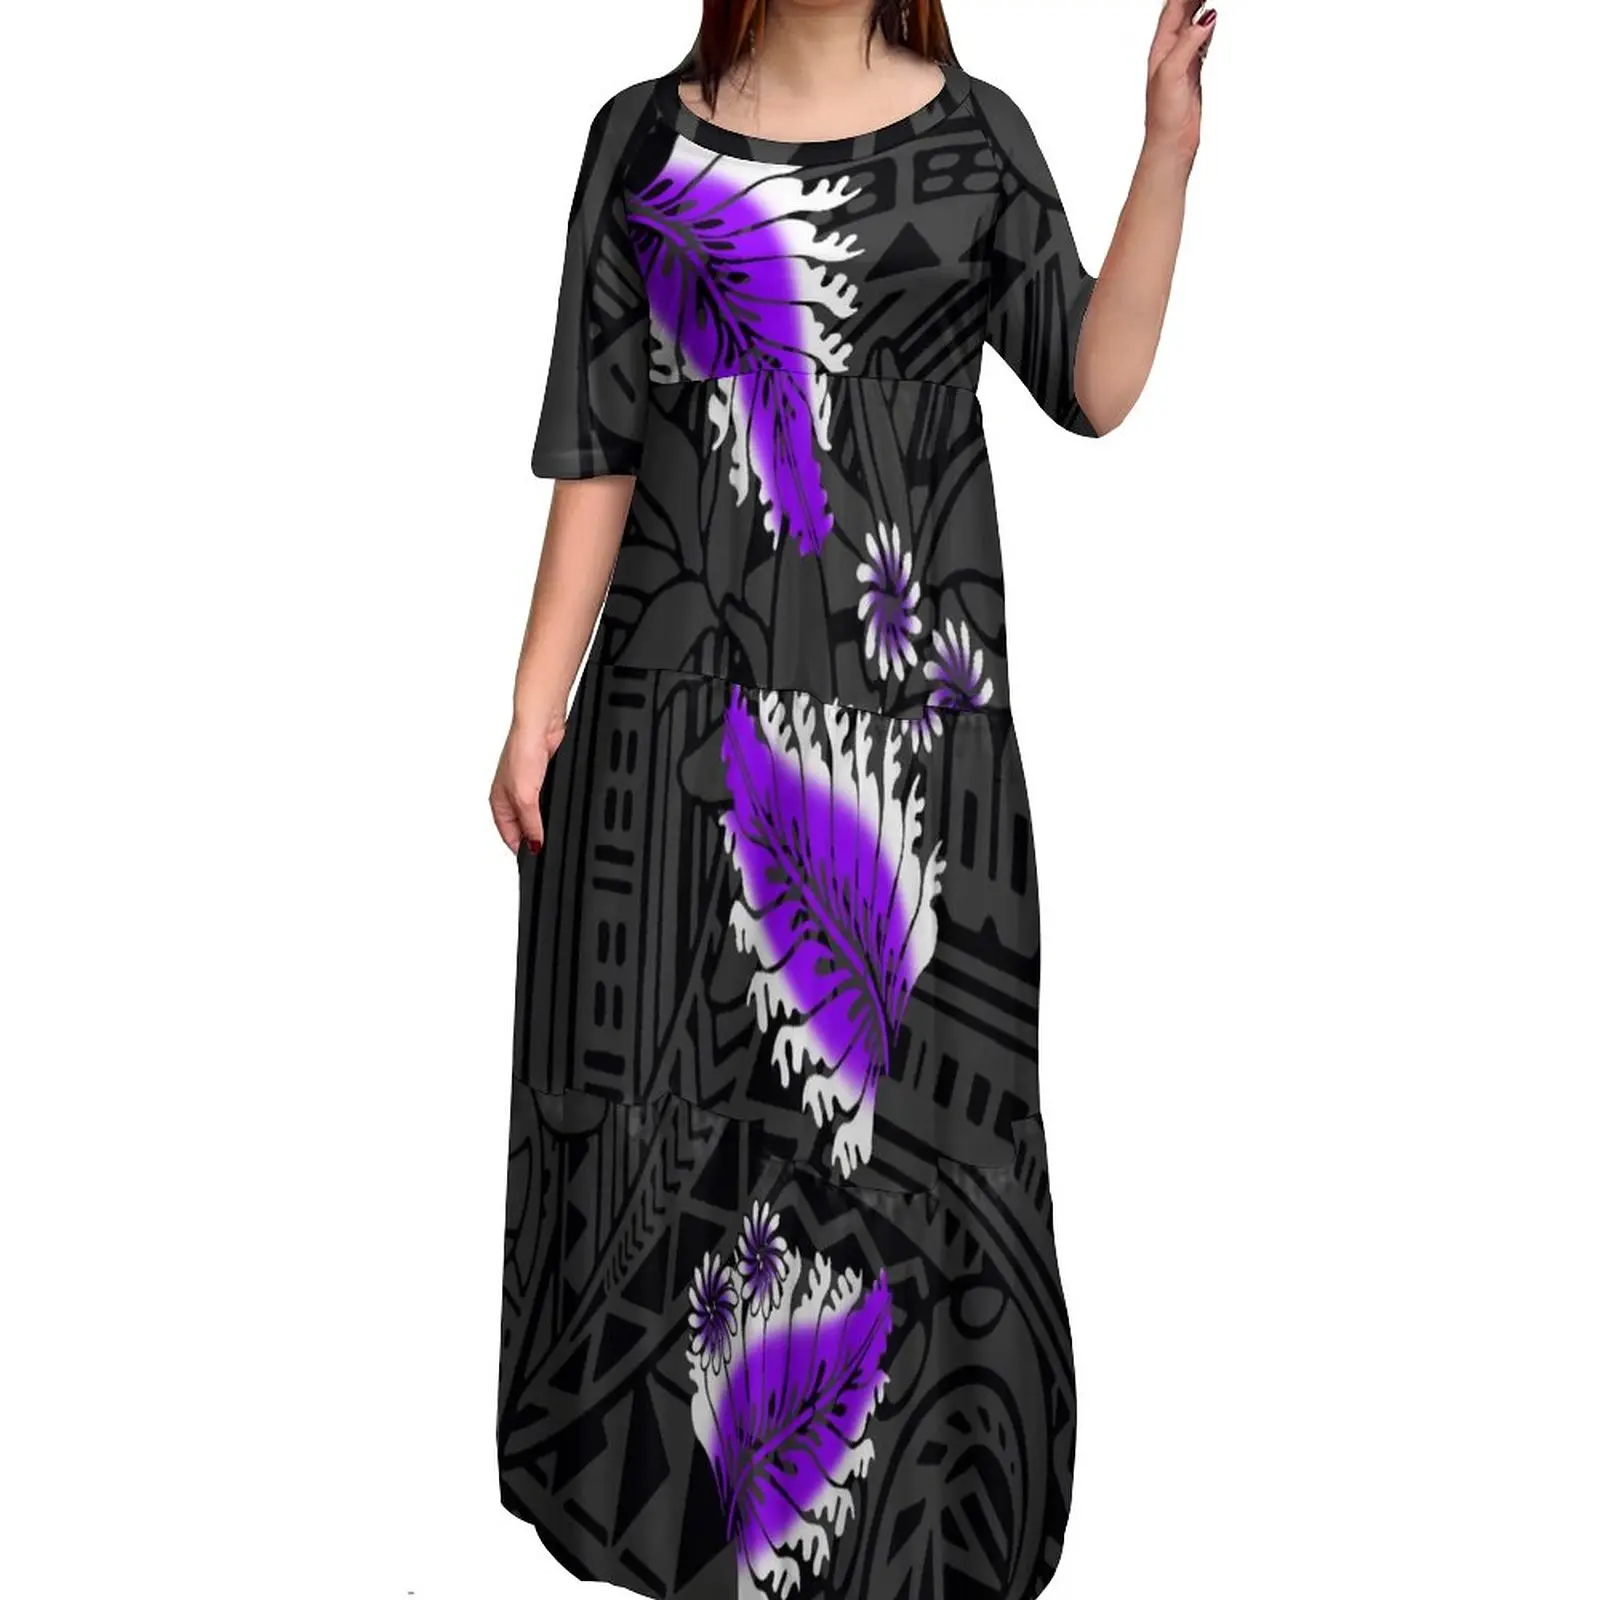 Samoan Dresses & Clothing  Pacific Island Clothing Online